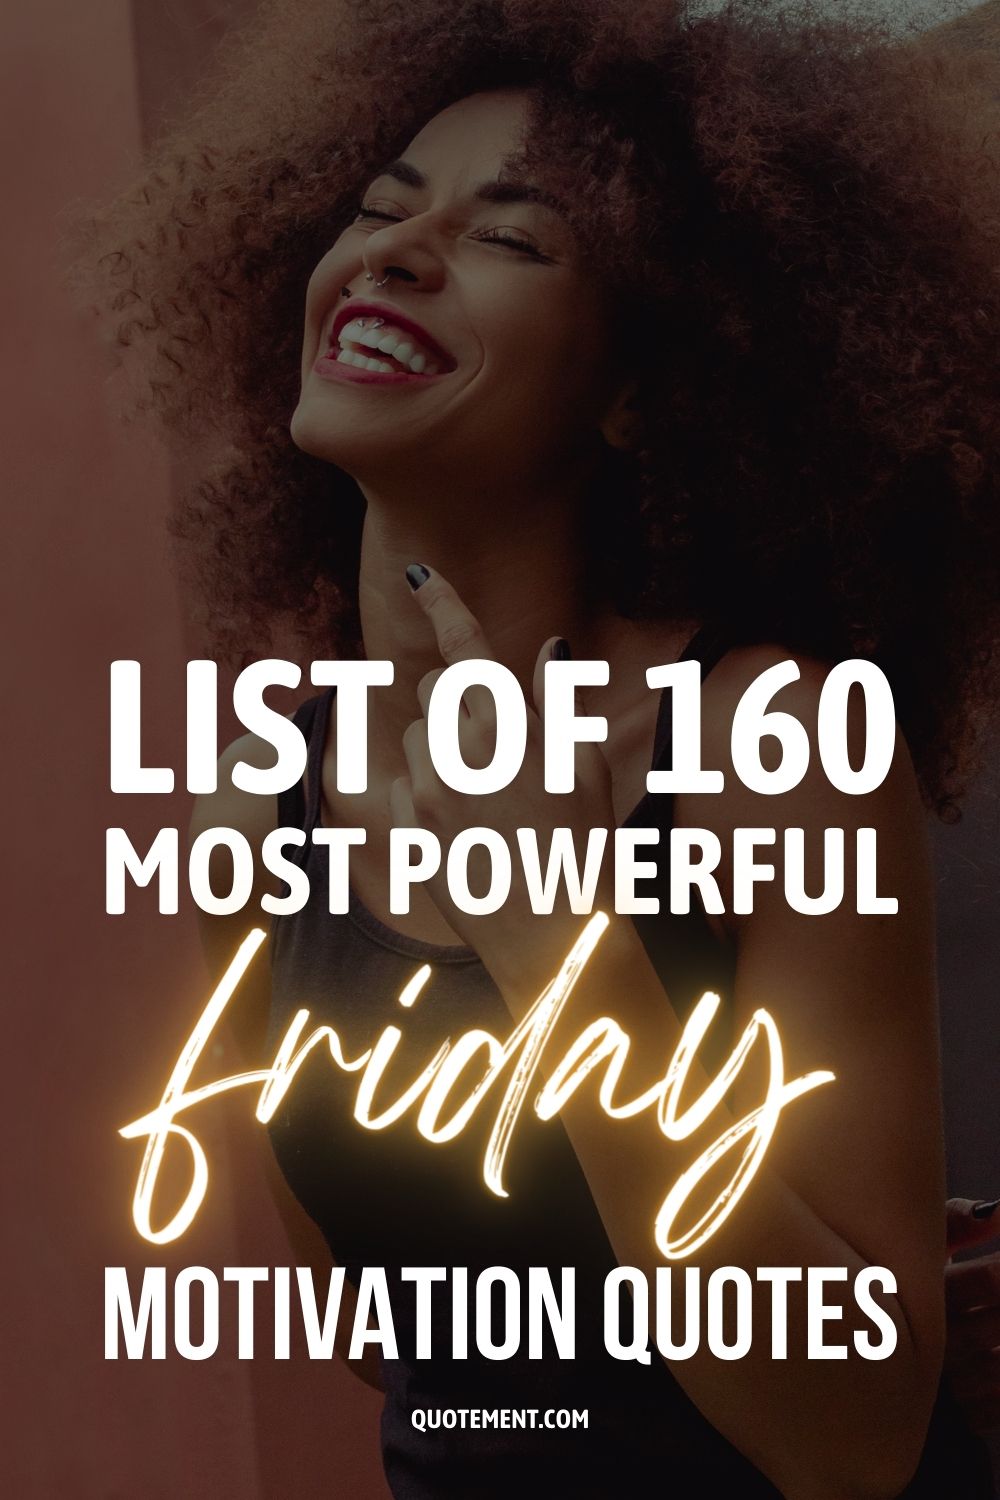 List Of 160 Most Powerful Friday Motivation Quotes
